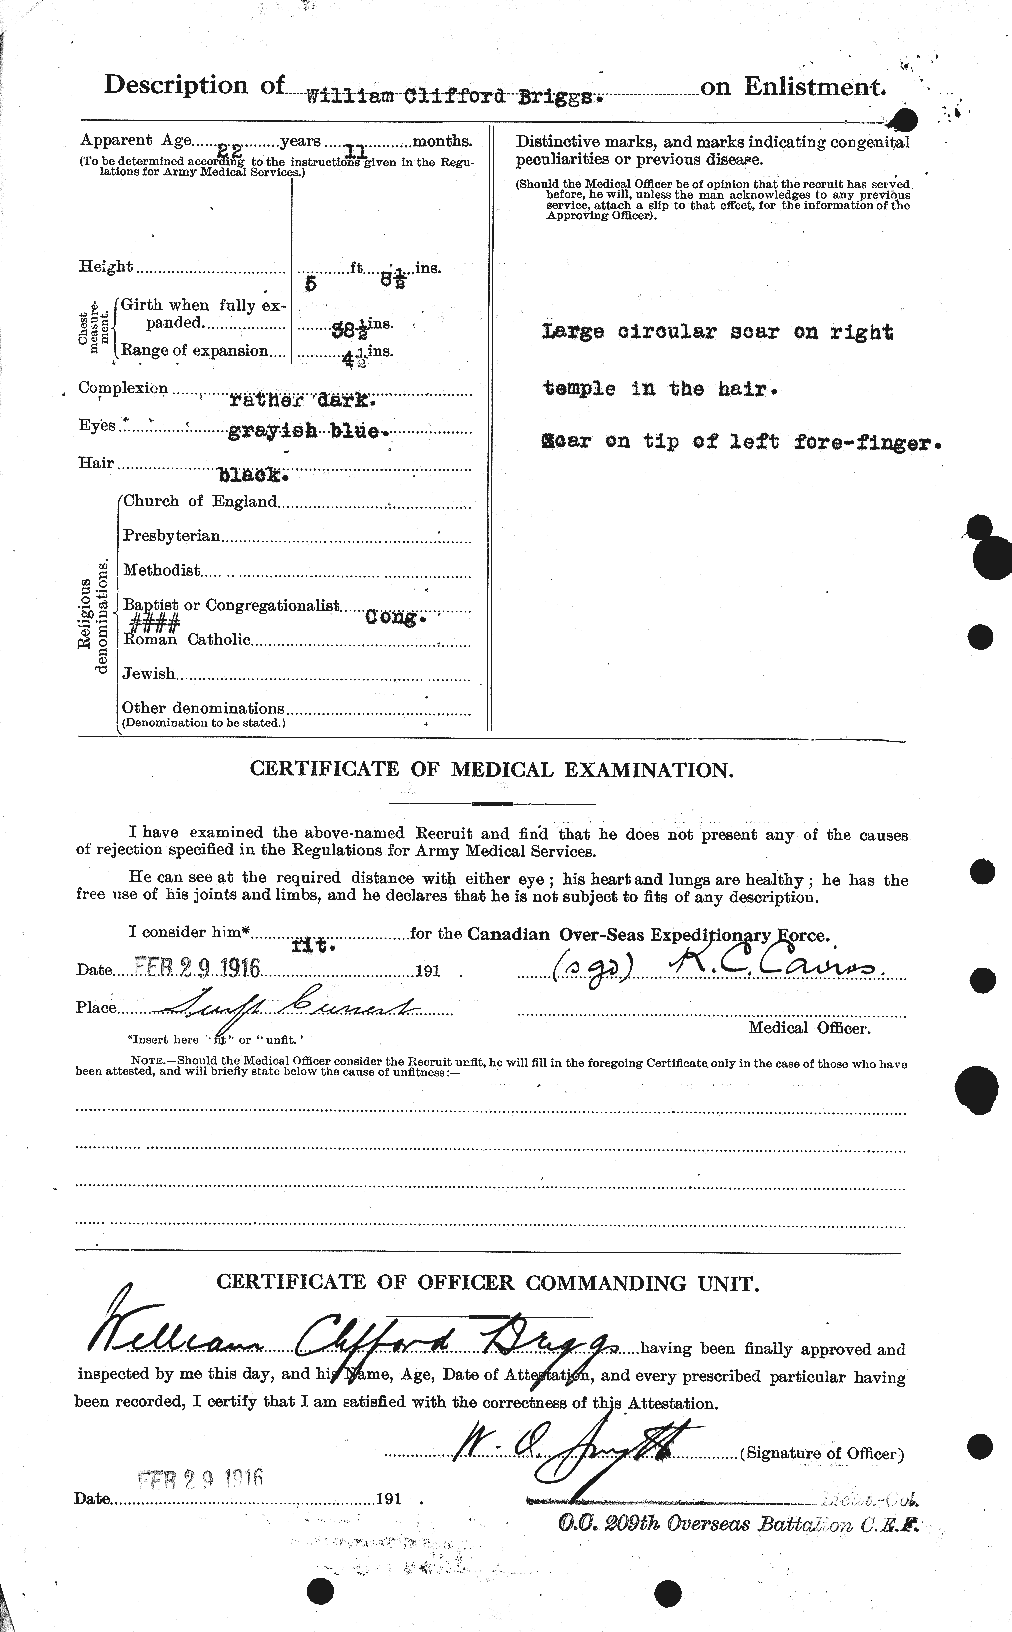 Personnel Records of the First World War - CEF 264118b